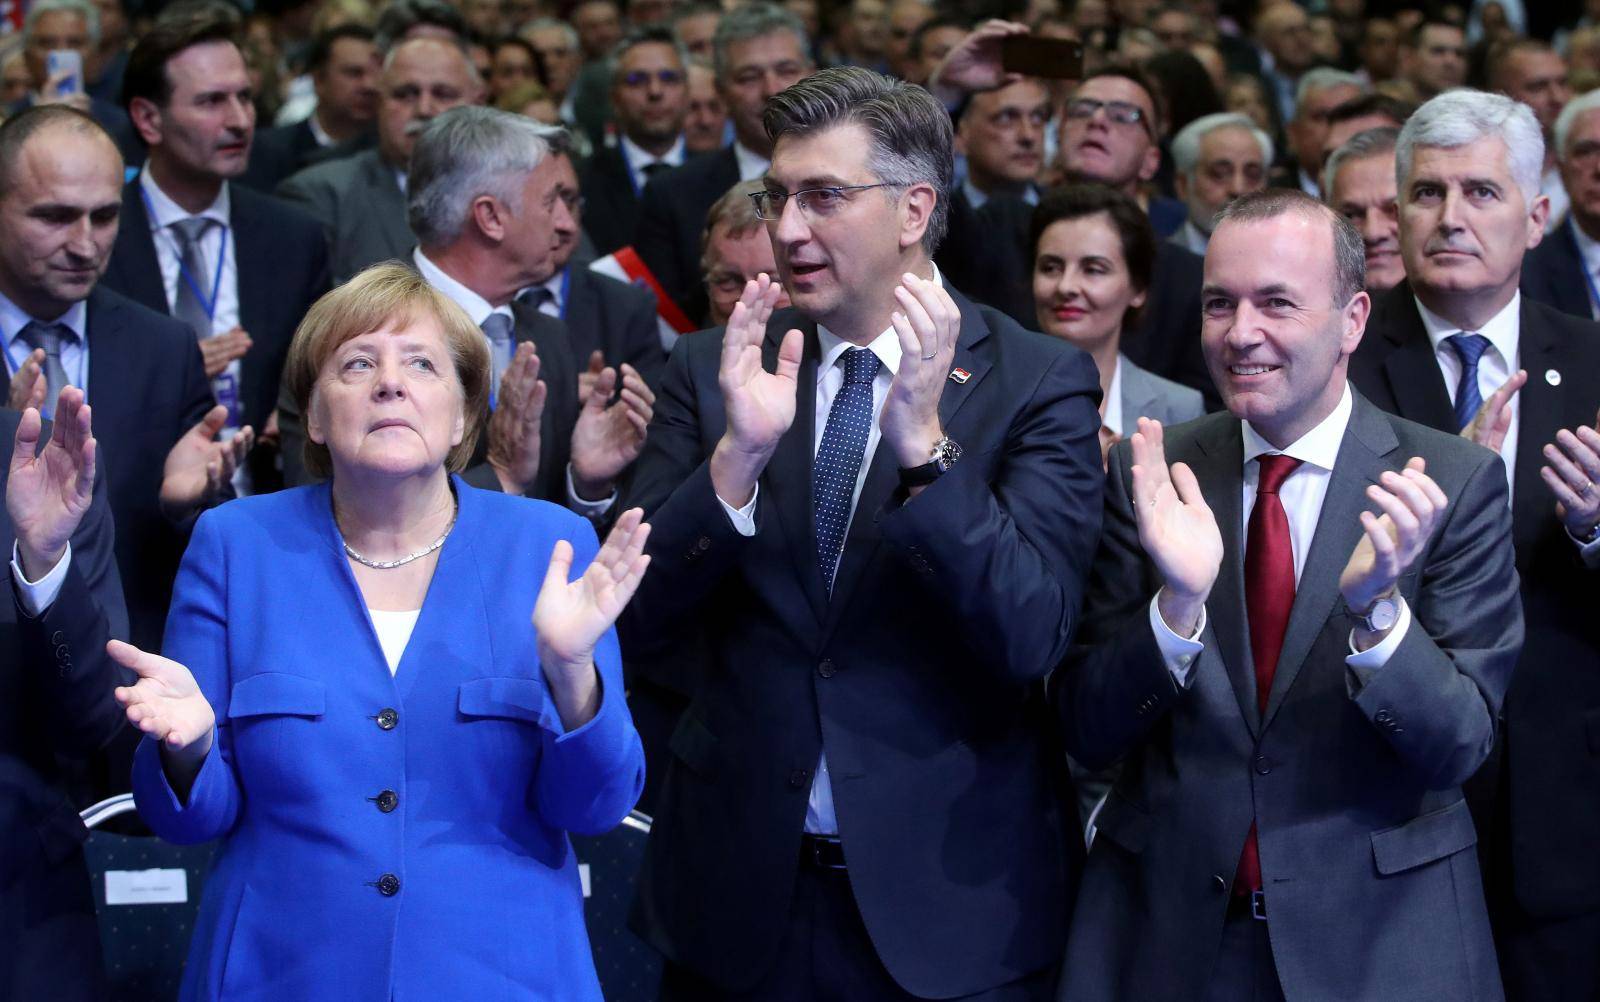 Croatia's Prime Minister Andrej Plenkovic, German Chancellor Angela Merkel and Manfred Weber of the European People's Party during EPP and the Croatian Democratic Union's campaign rally for the European Parliament elections in Zagreb